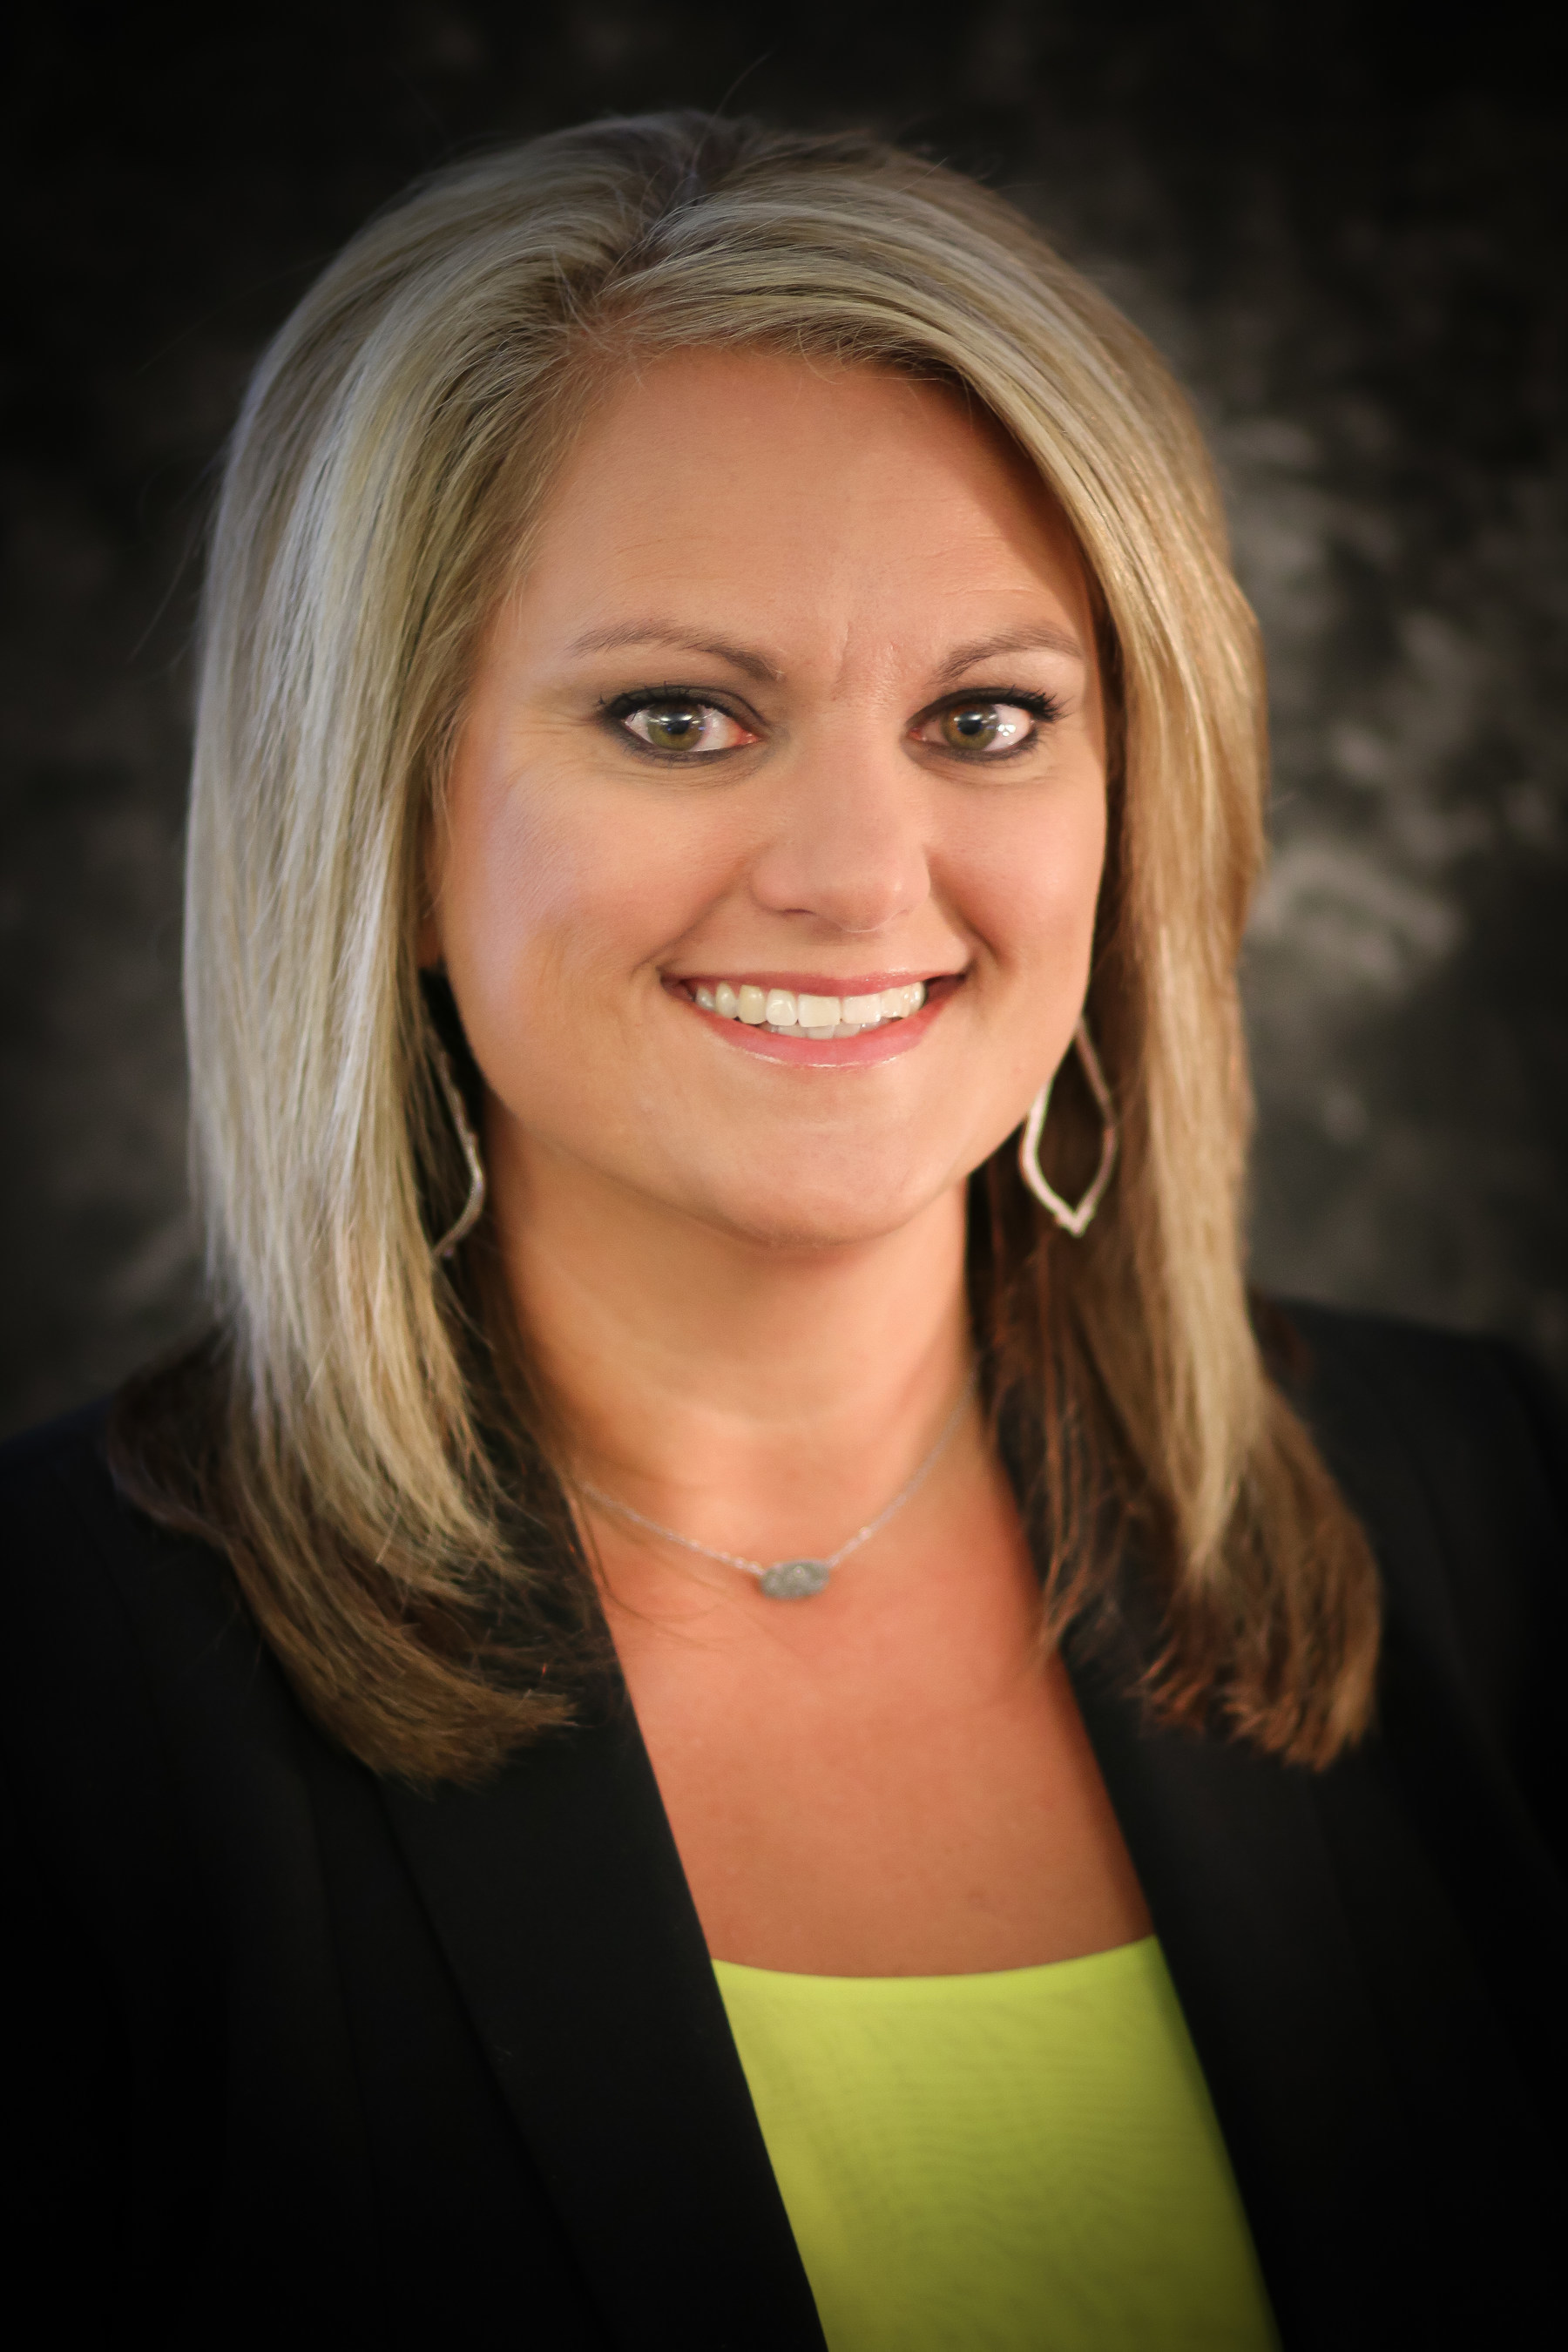 Brenda Wendt promoted to Gulf Coast Divisional Manager of Woodforest National Bank